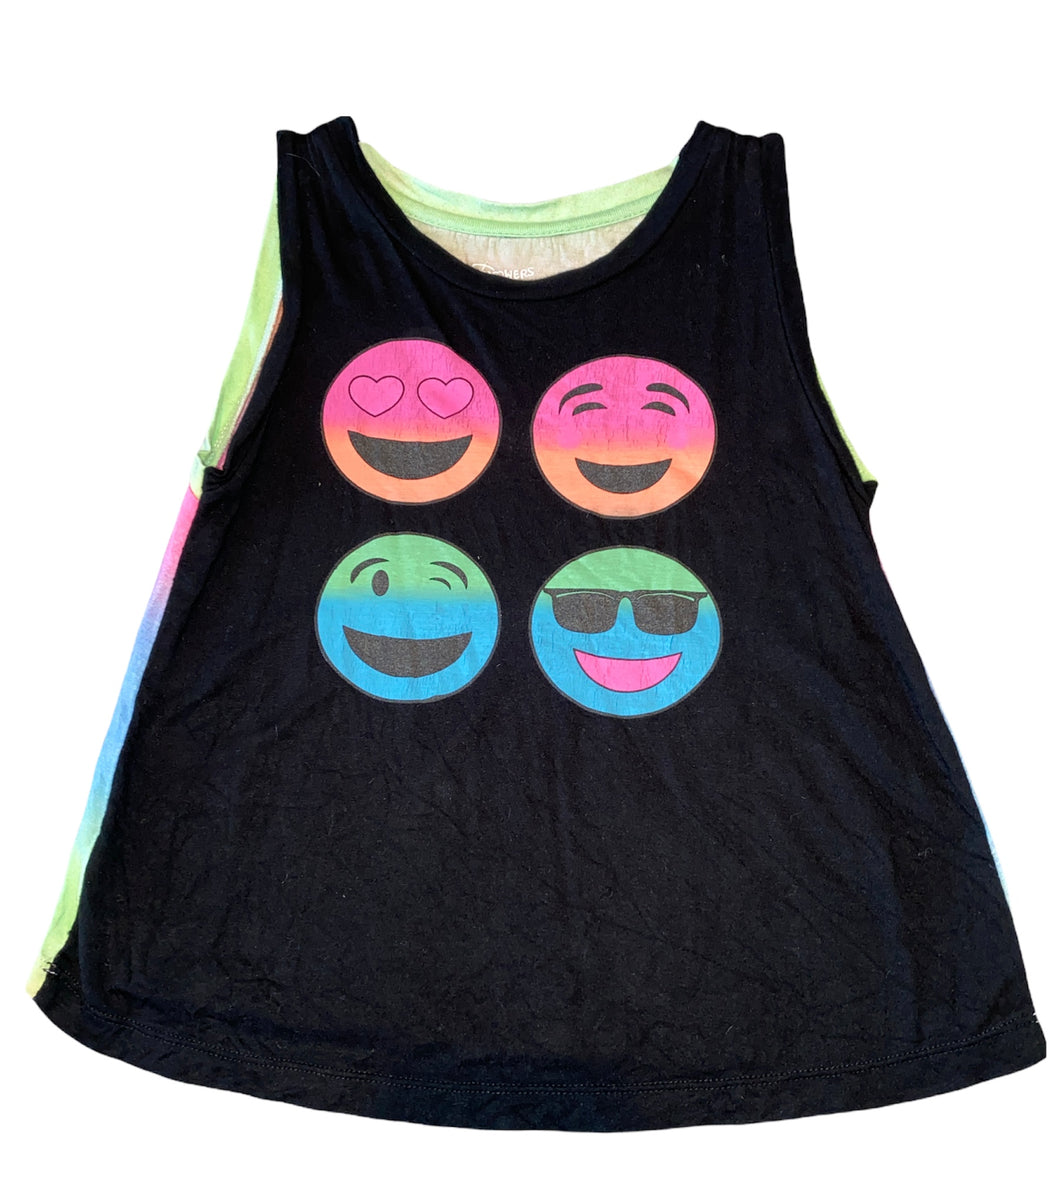 Flowers By Zoe toddler girls happy faces tank top 3T